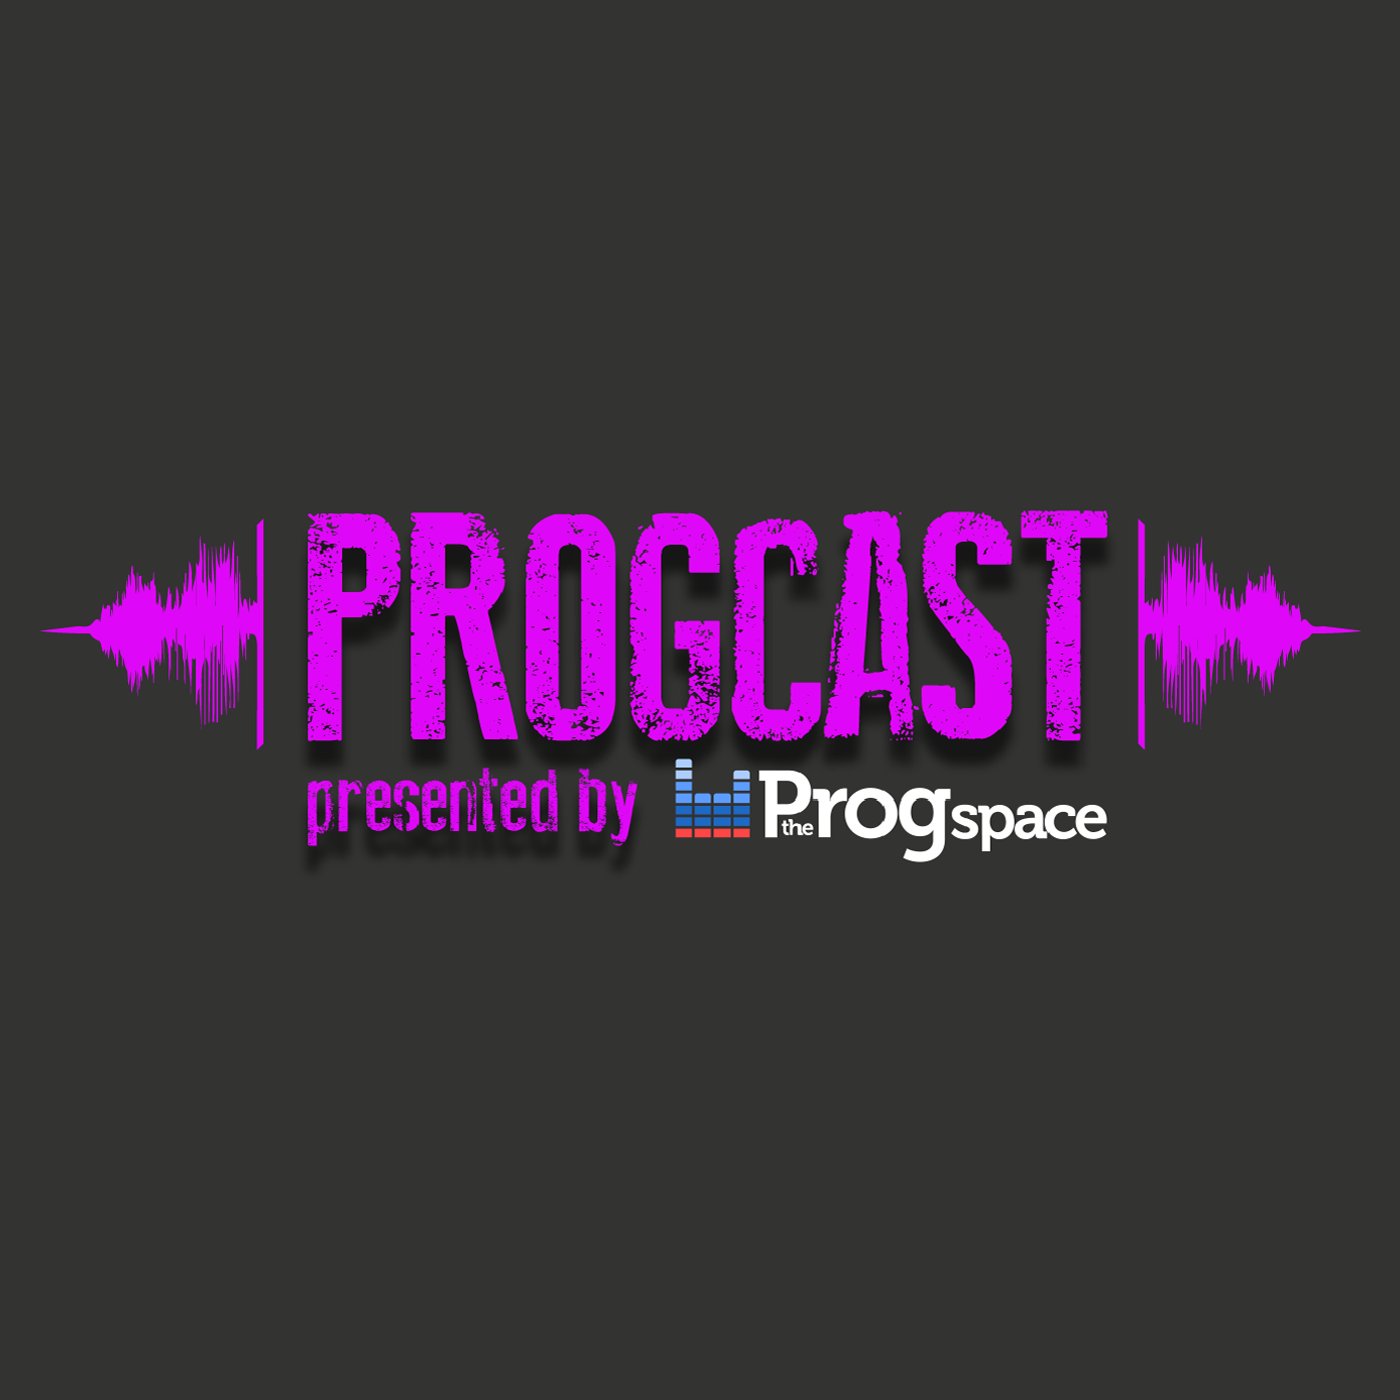 Episode 007: The latest hot singles and videos from the Prog world